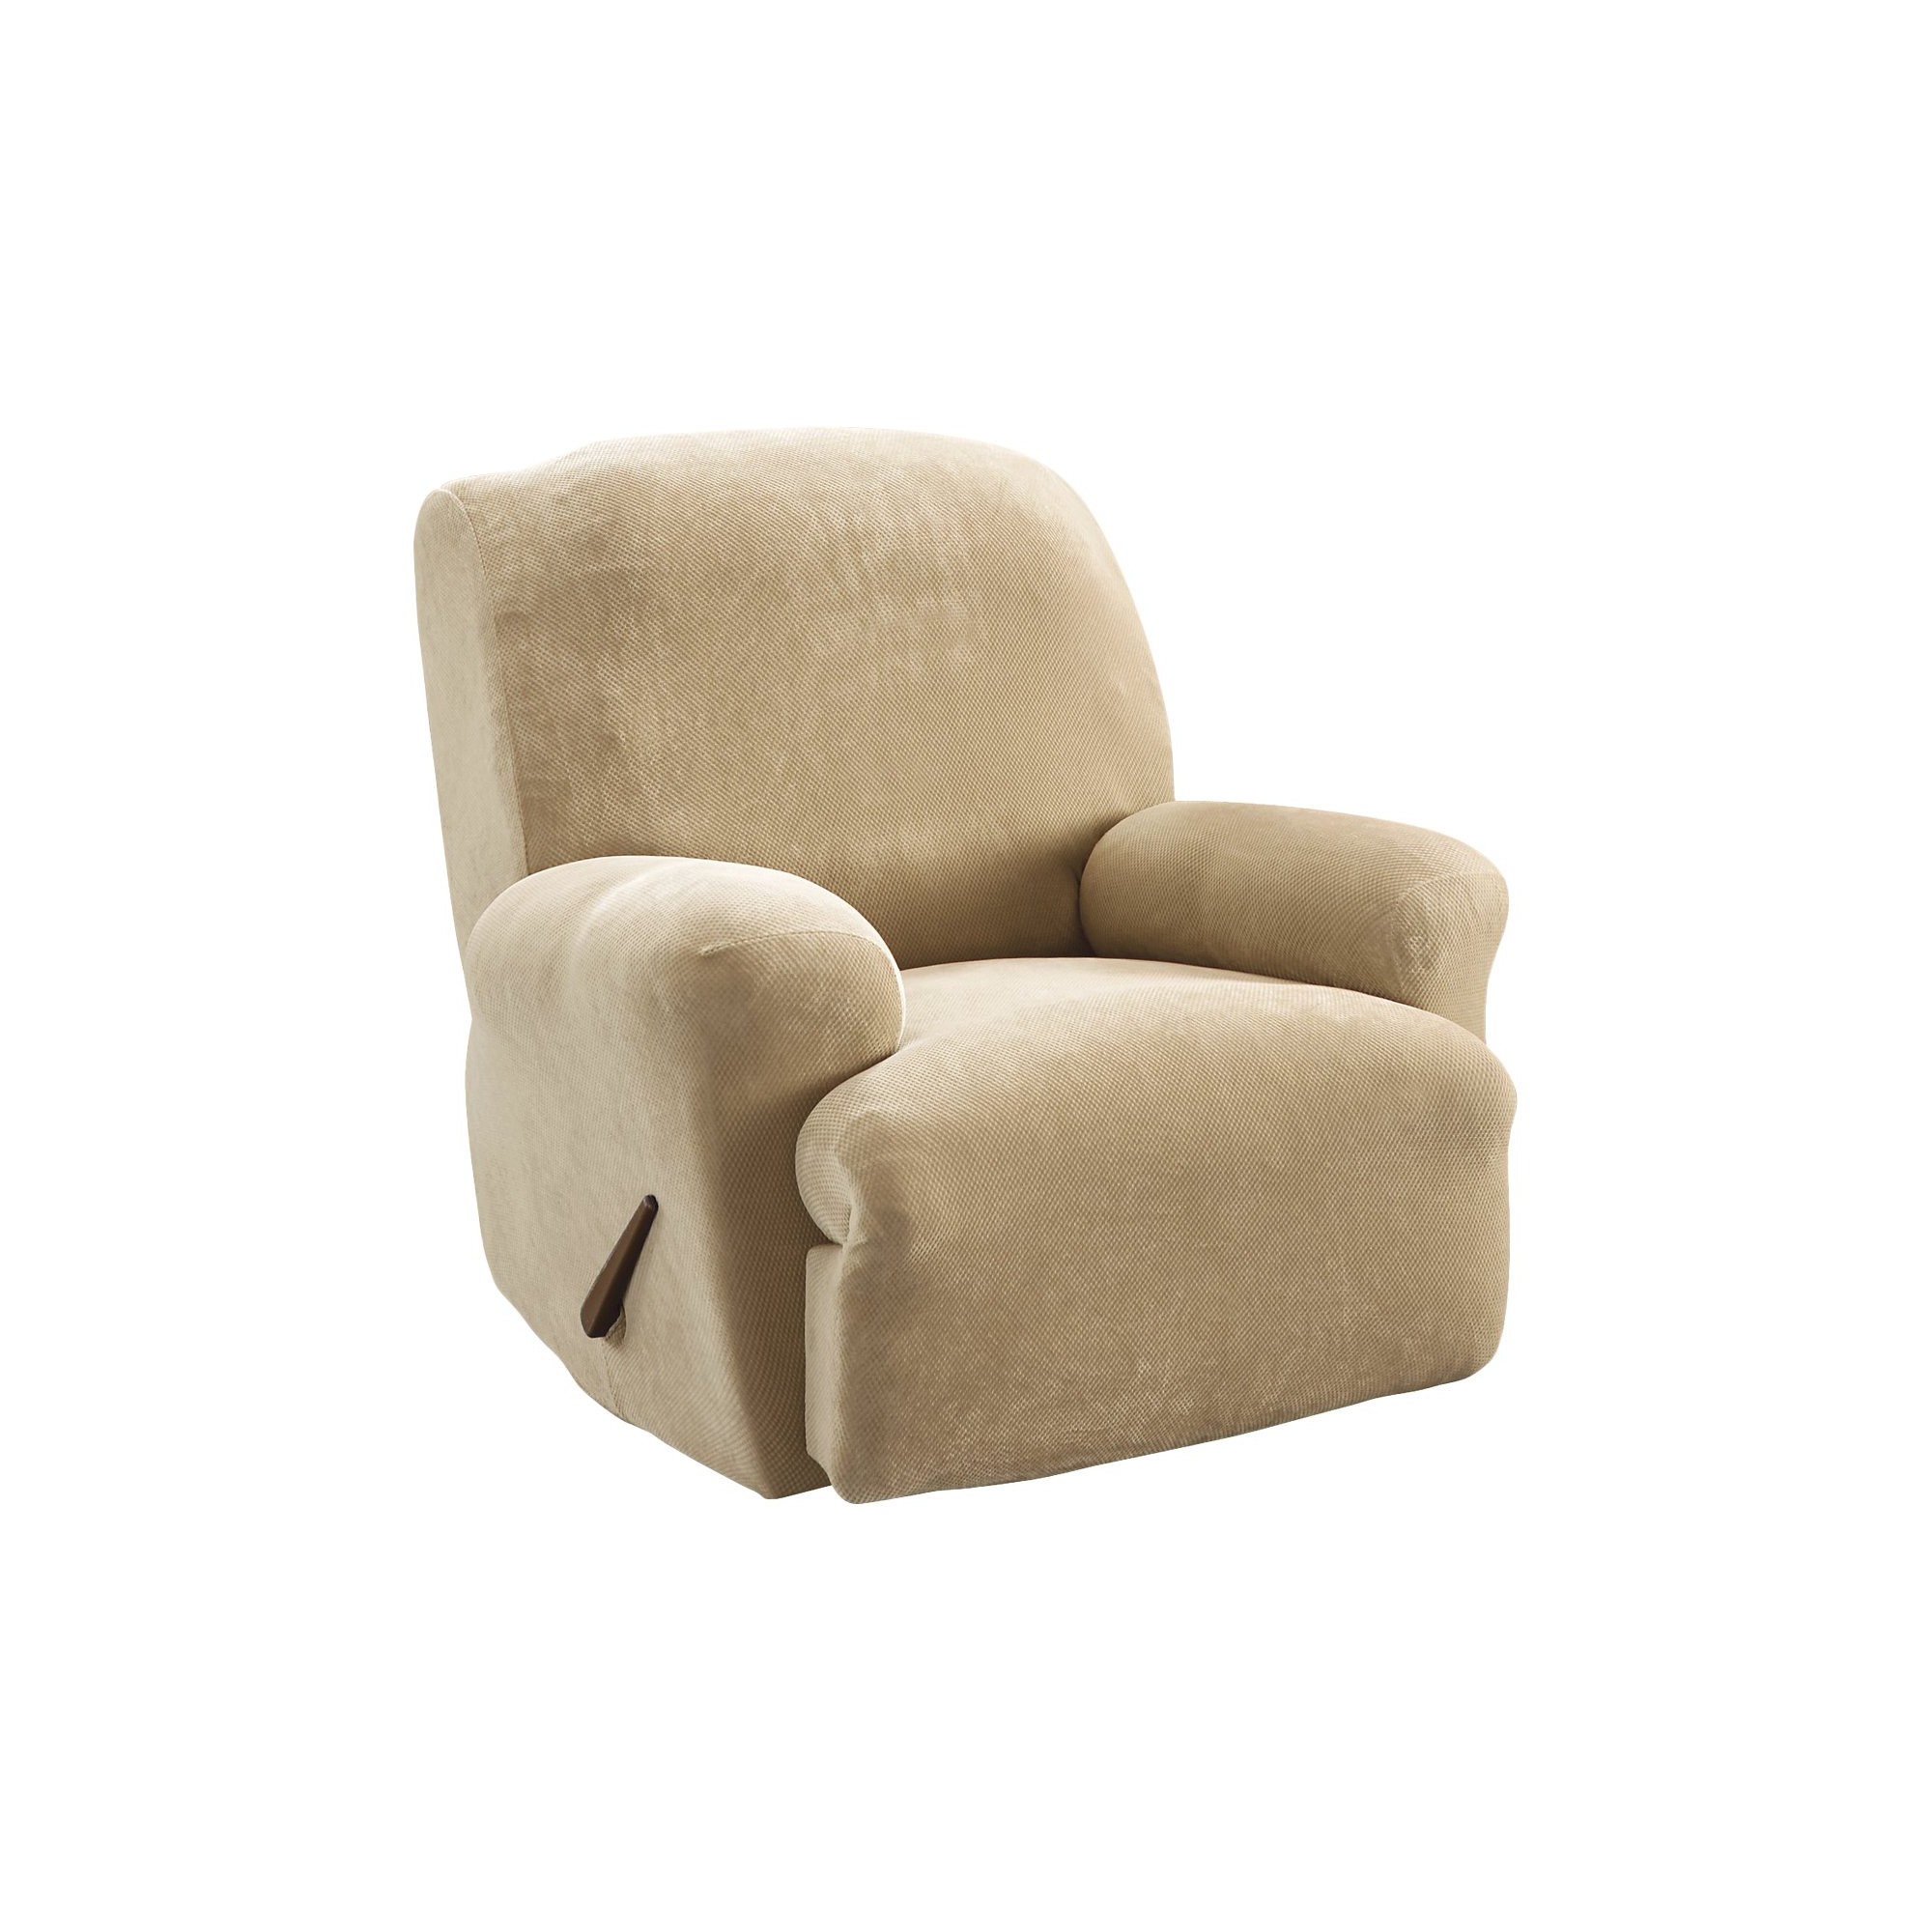 Cream Stretch Pique Slipcover Recliner - Sure Fit, Ivory